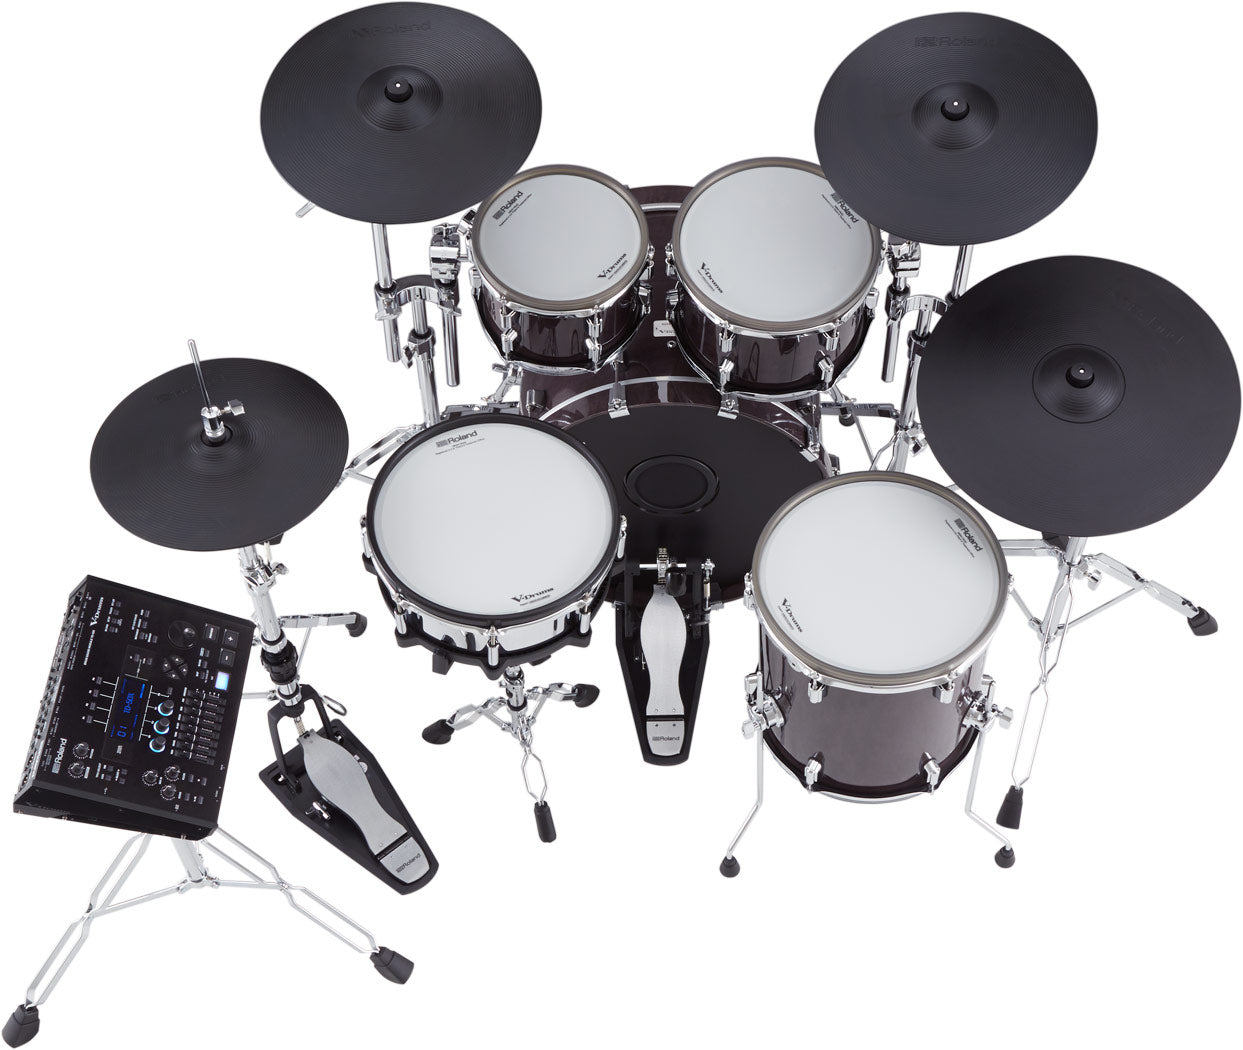 Roland V-Drums Acoustic Design VAD706GE Electronic Drum Set - Gloss Ebony Zoso Music